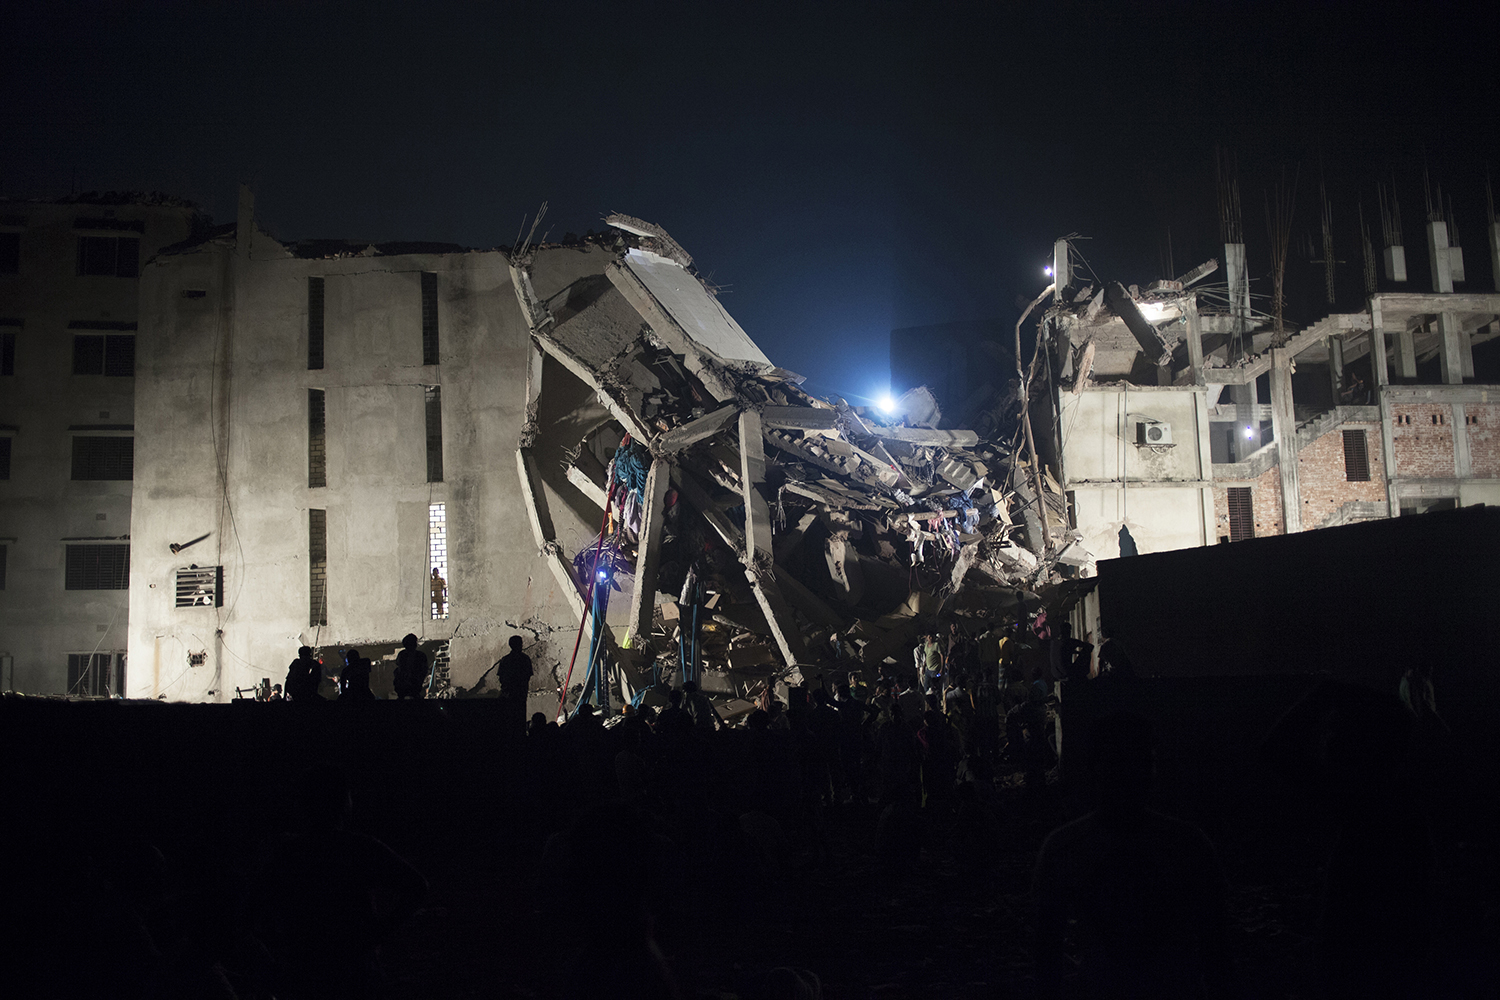 April 25, 2013. The rubble of the collapsed 8-story Savar Rana Plaza garment factory building in Dhaka, Bangladesh.